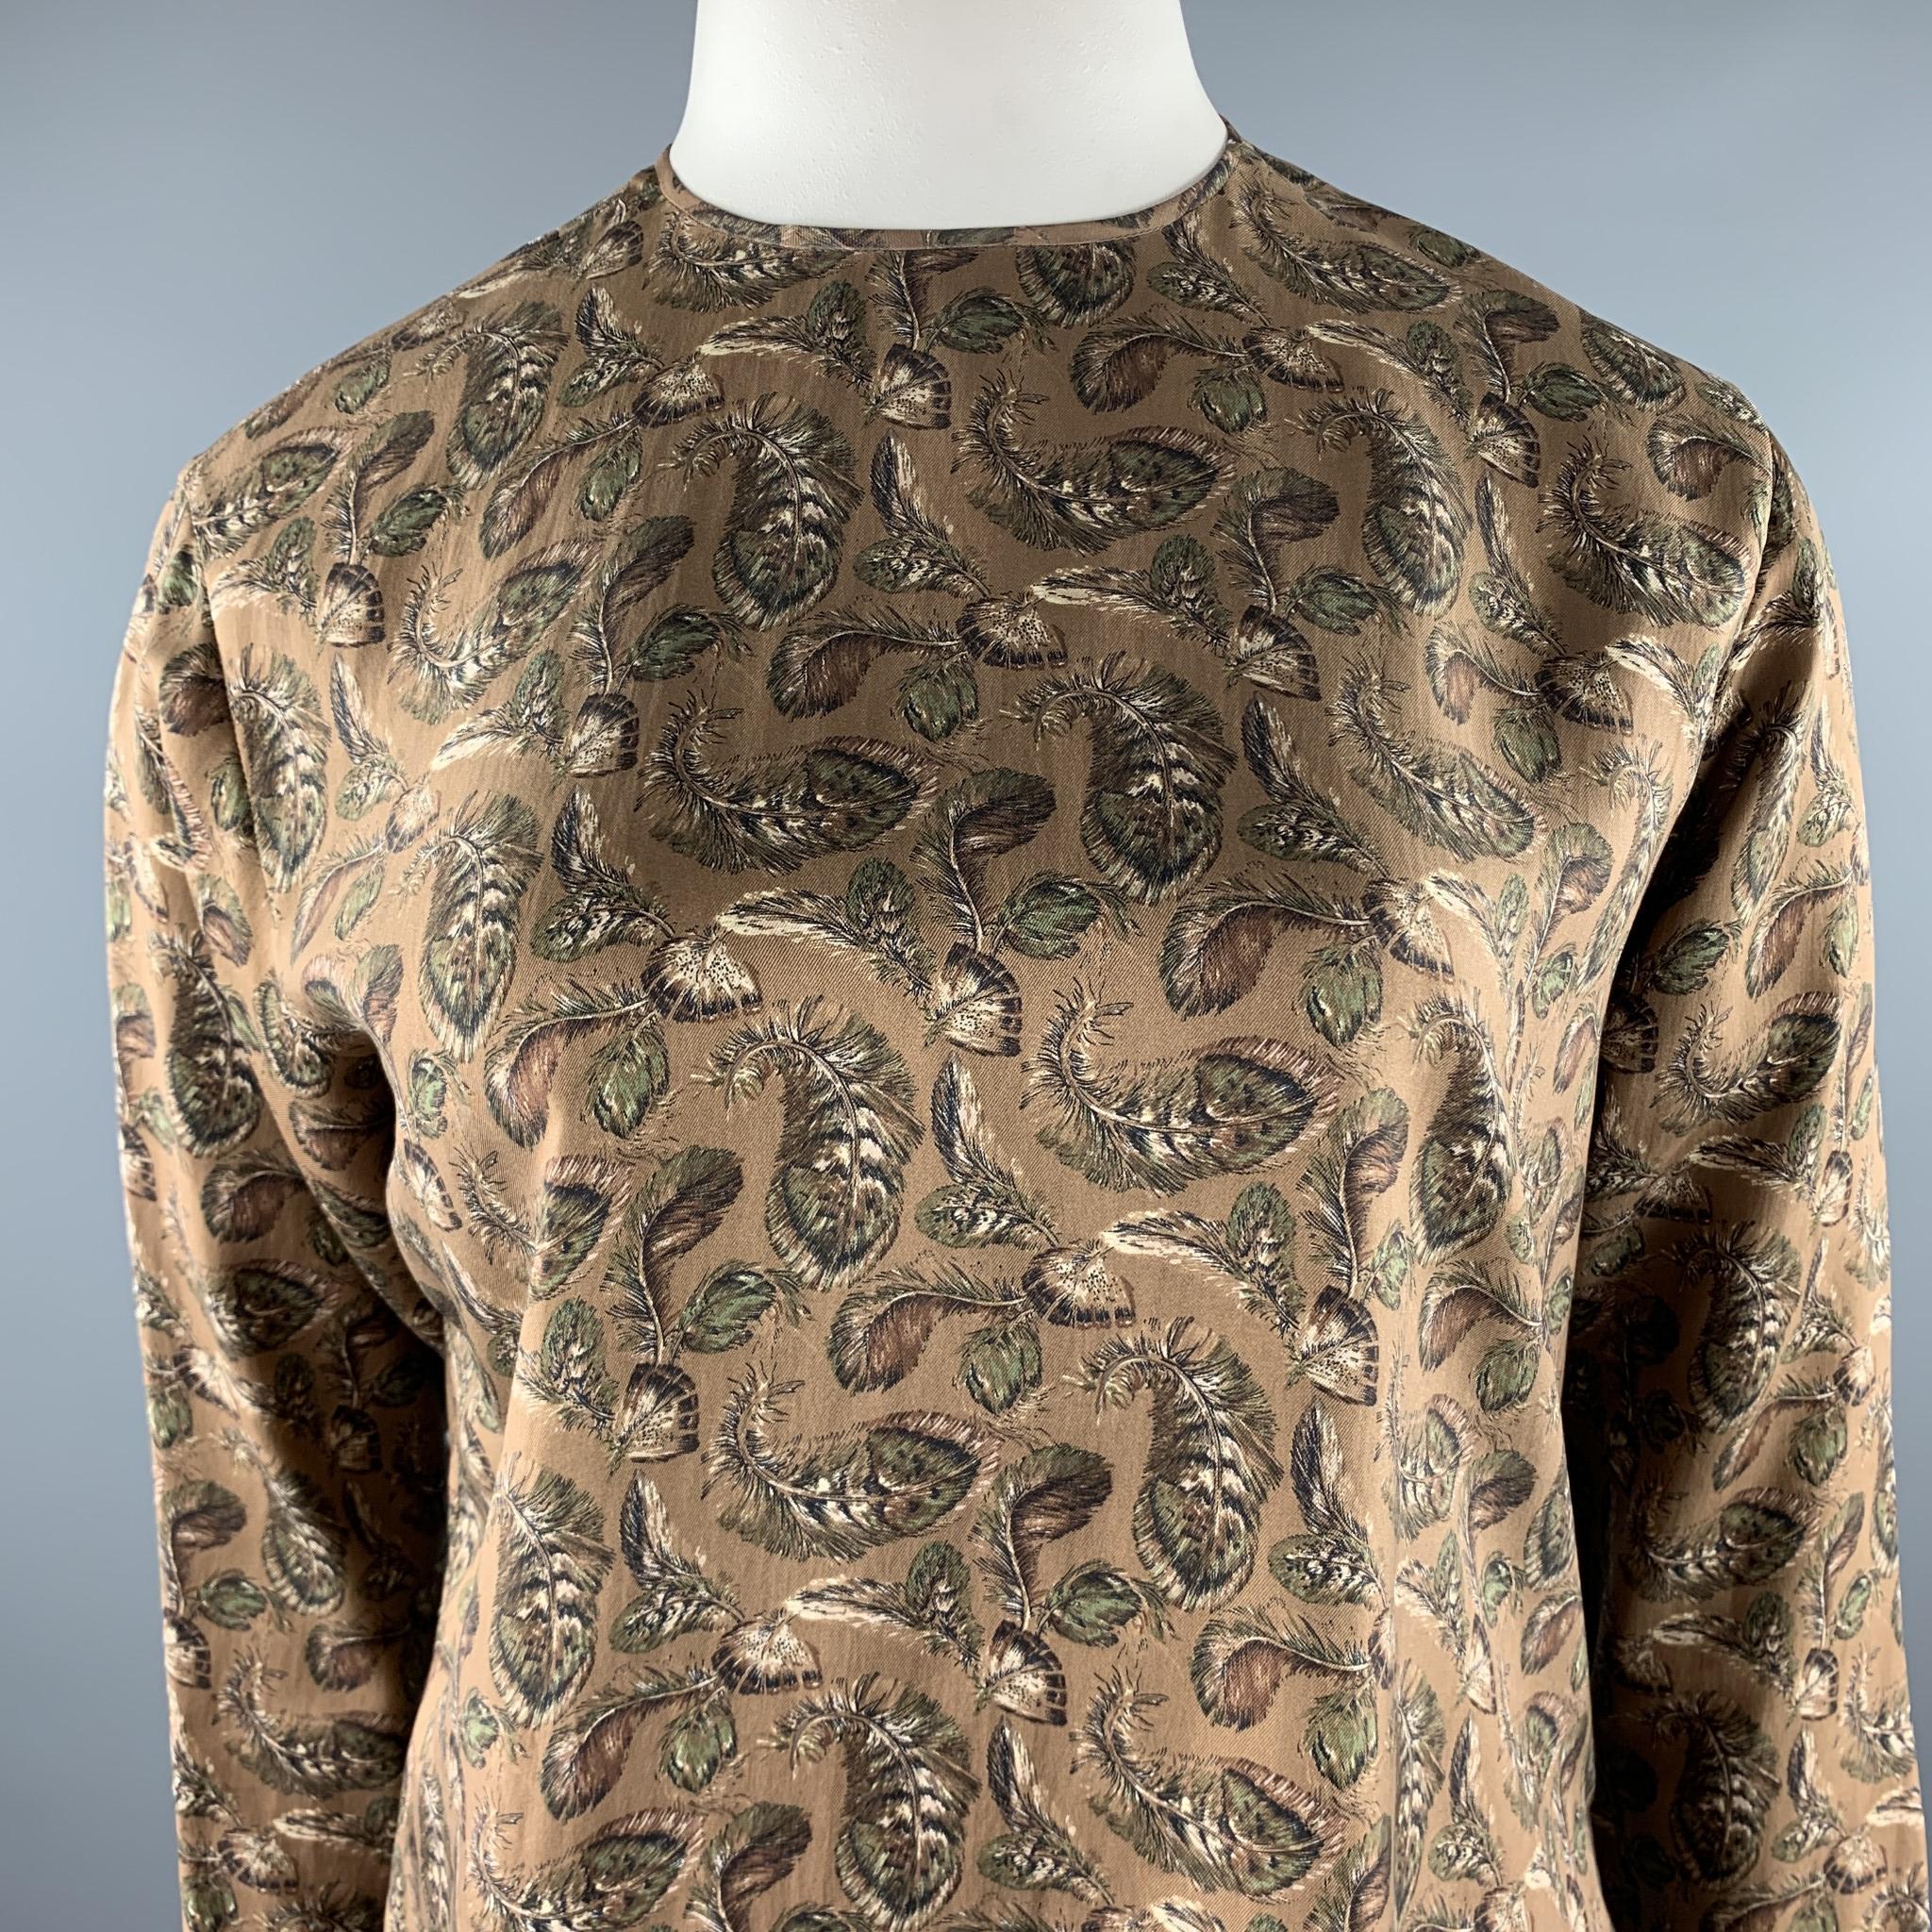 JOSEPH ABBOUD blouse comes in a brown feather print silk featuring a back button detail.

Excellent Pre-Owned Condition.
Marked: 46/12

Measurements:

Shoulder: 18 in. 
Bust: 42 in. 
Sleeve: 21.5 in. 
Length: 26 in. 

SKU: 94307
Category: